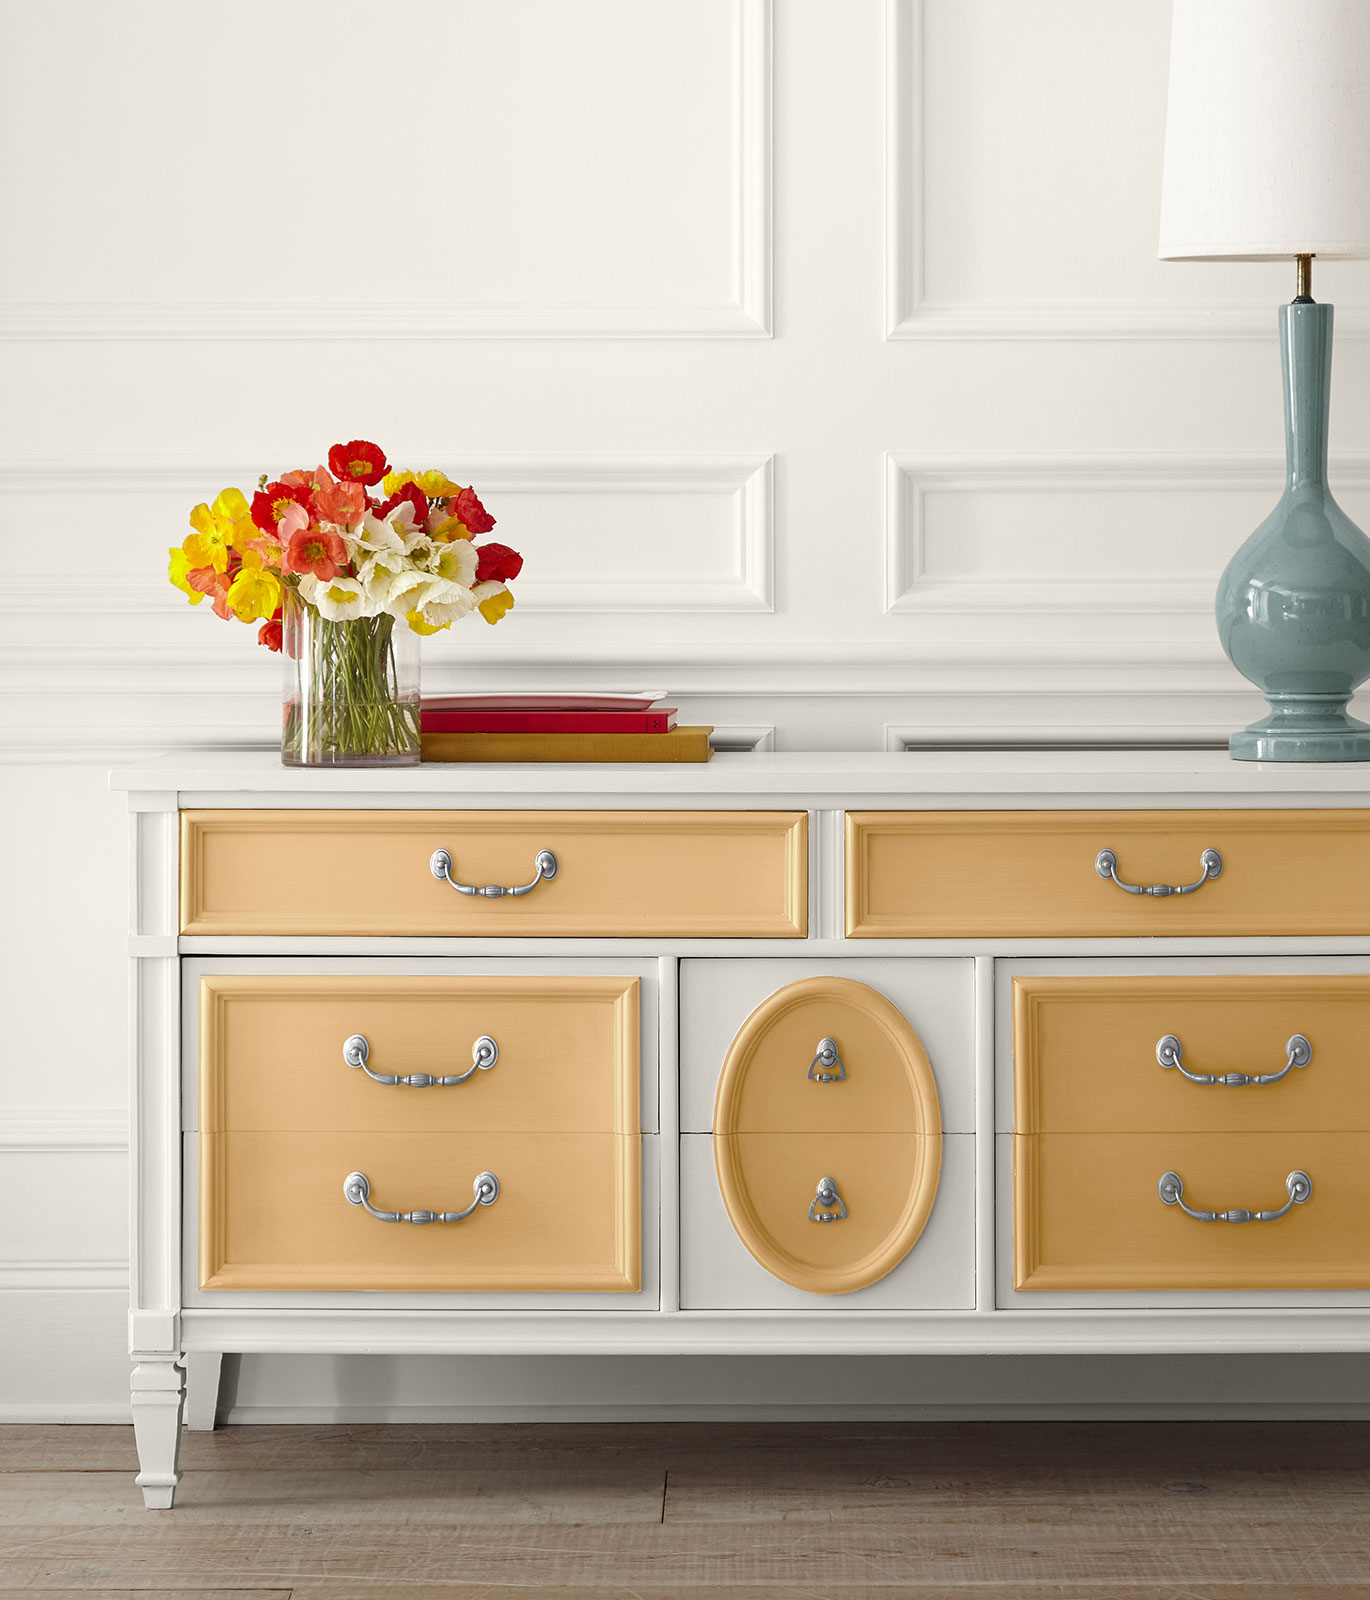 A dresser painted in white. To give a subtle pop of color, the drawer facings are painted in yellow-gold color.